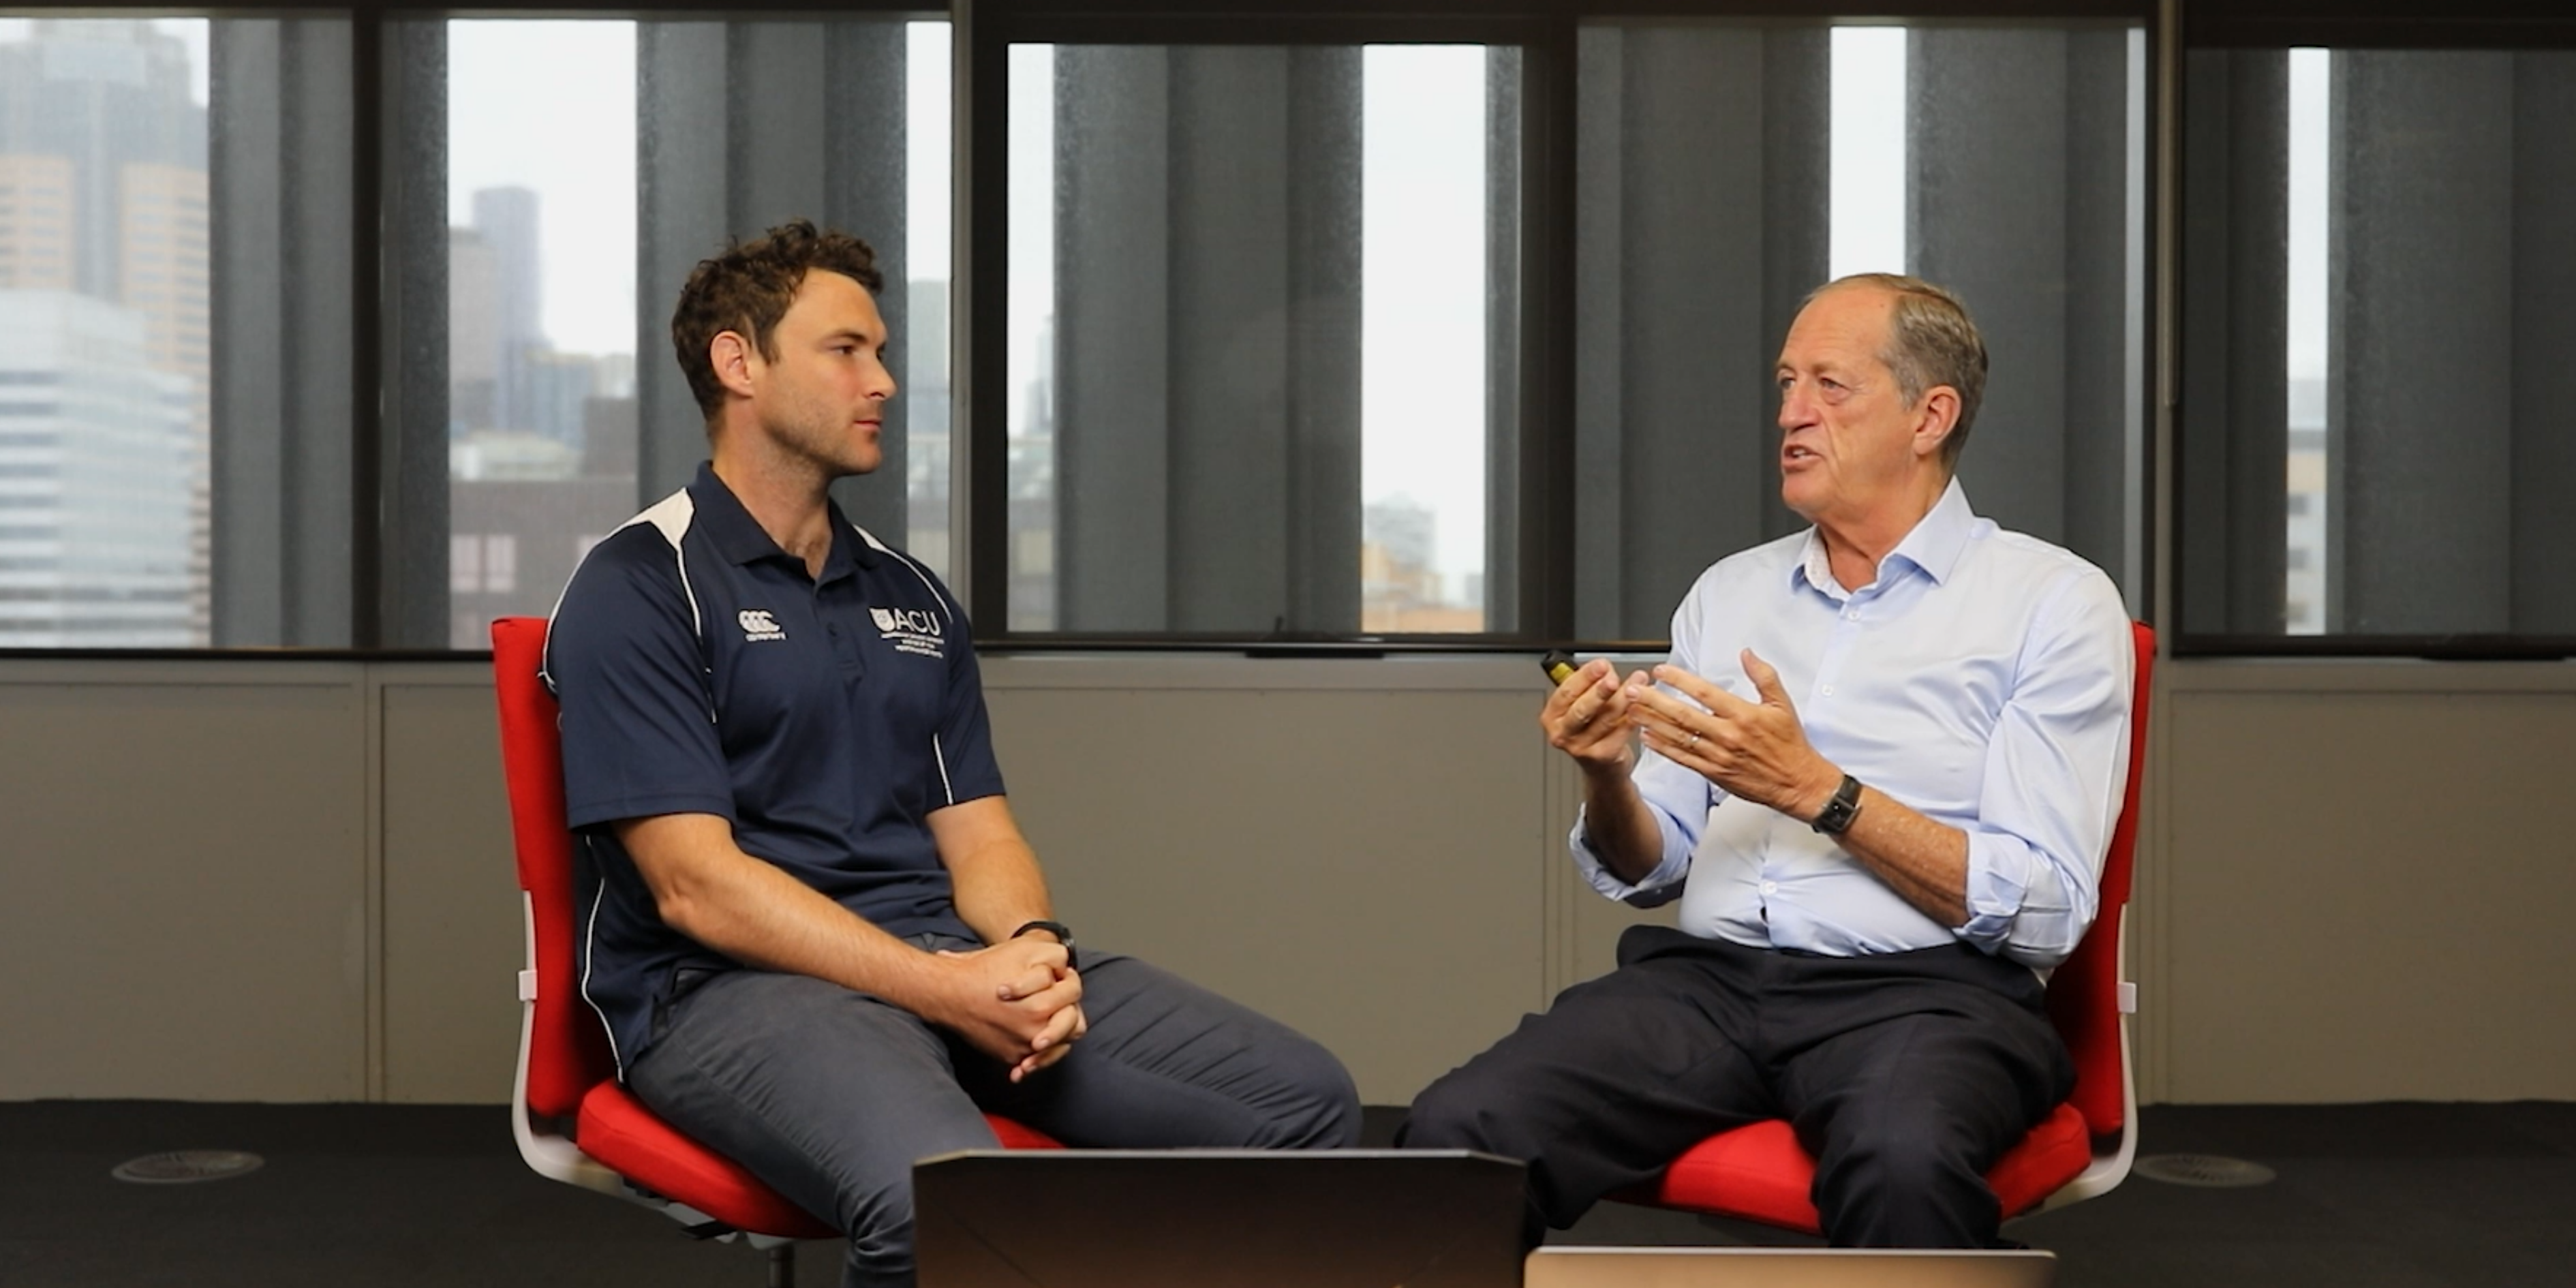 Peter Brukner and Ryan Timmins chat about man string strain assessment, rehabilitation and ACL hamstring injury prevention.